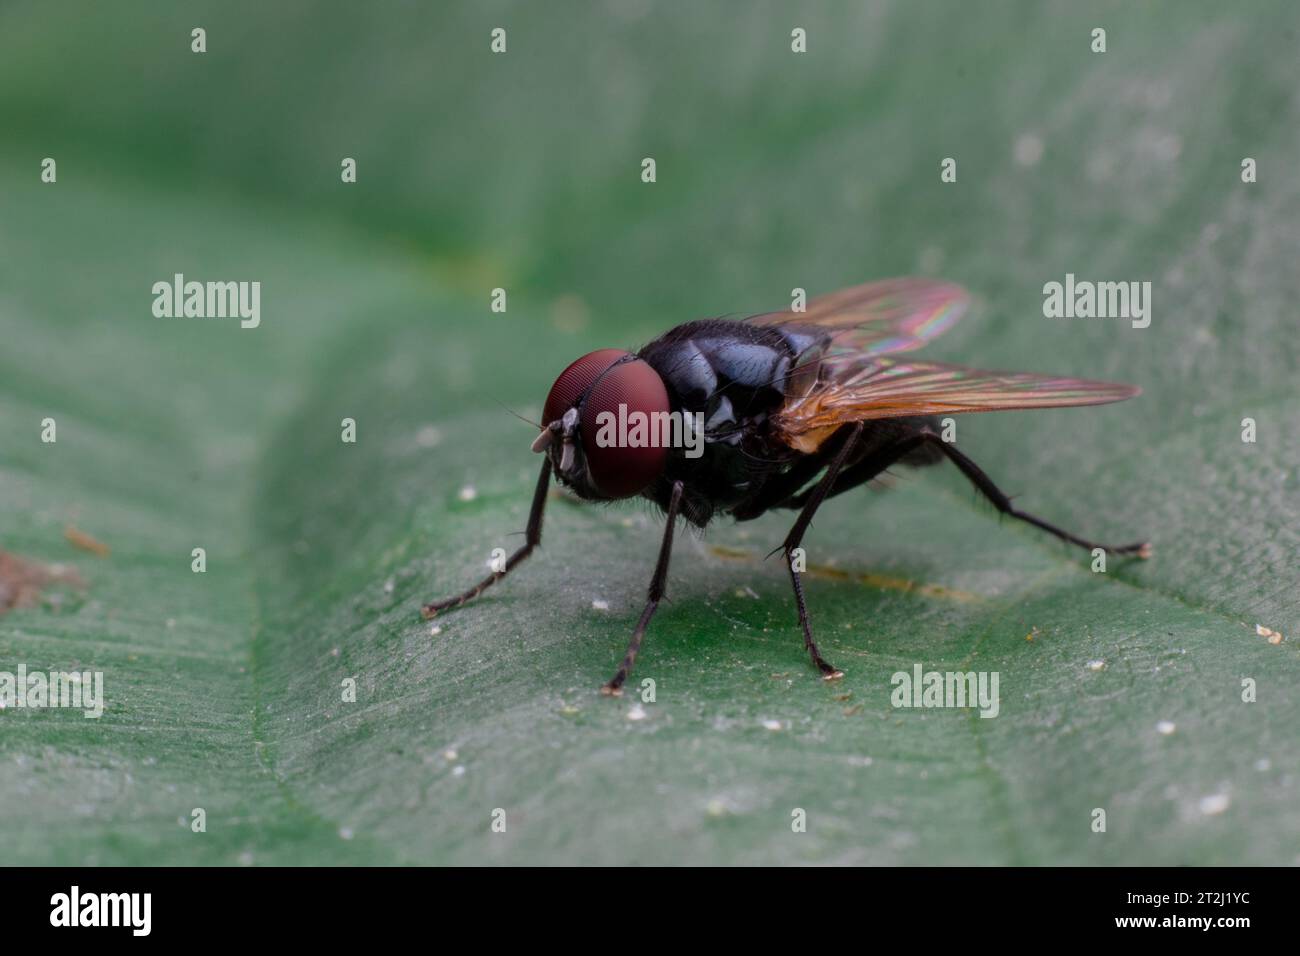 macro photo of a fly resting on a green leaf lookign to the left Stock Photo